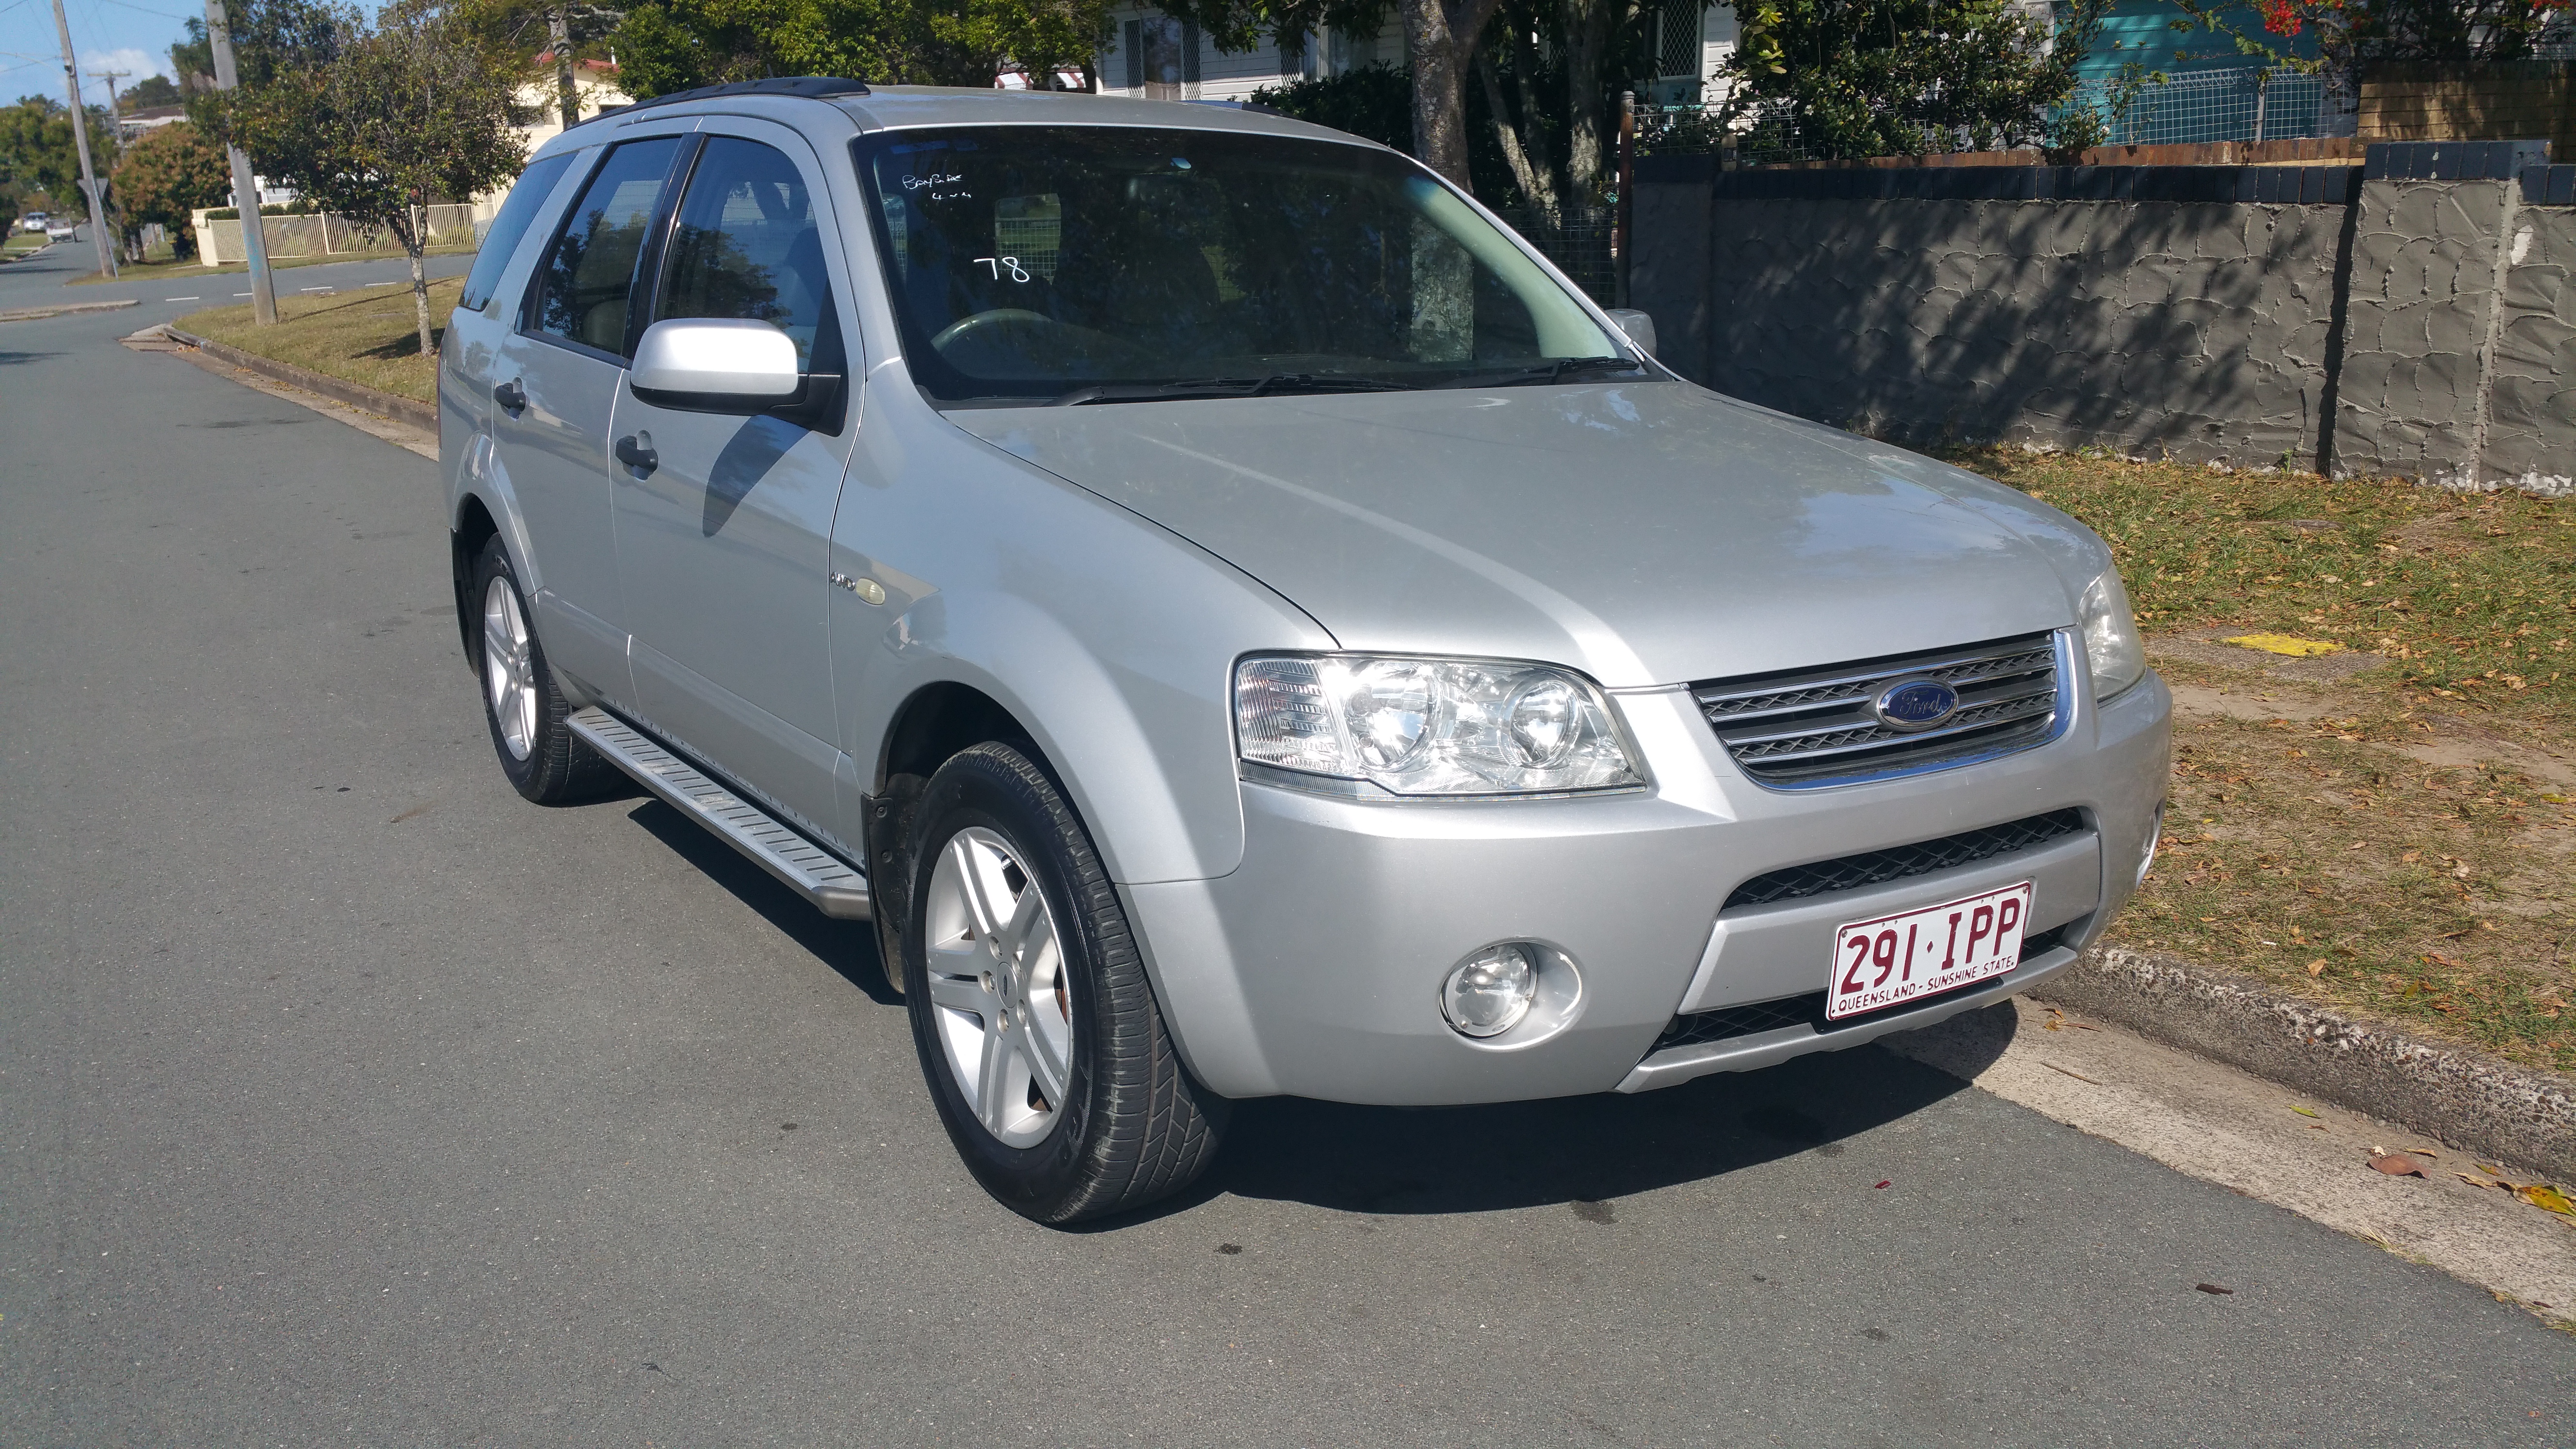 Ford territory 4wd ability #4